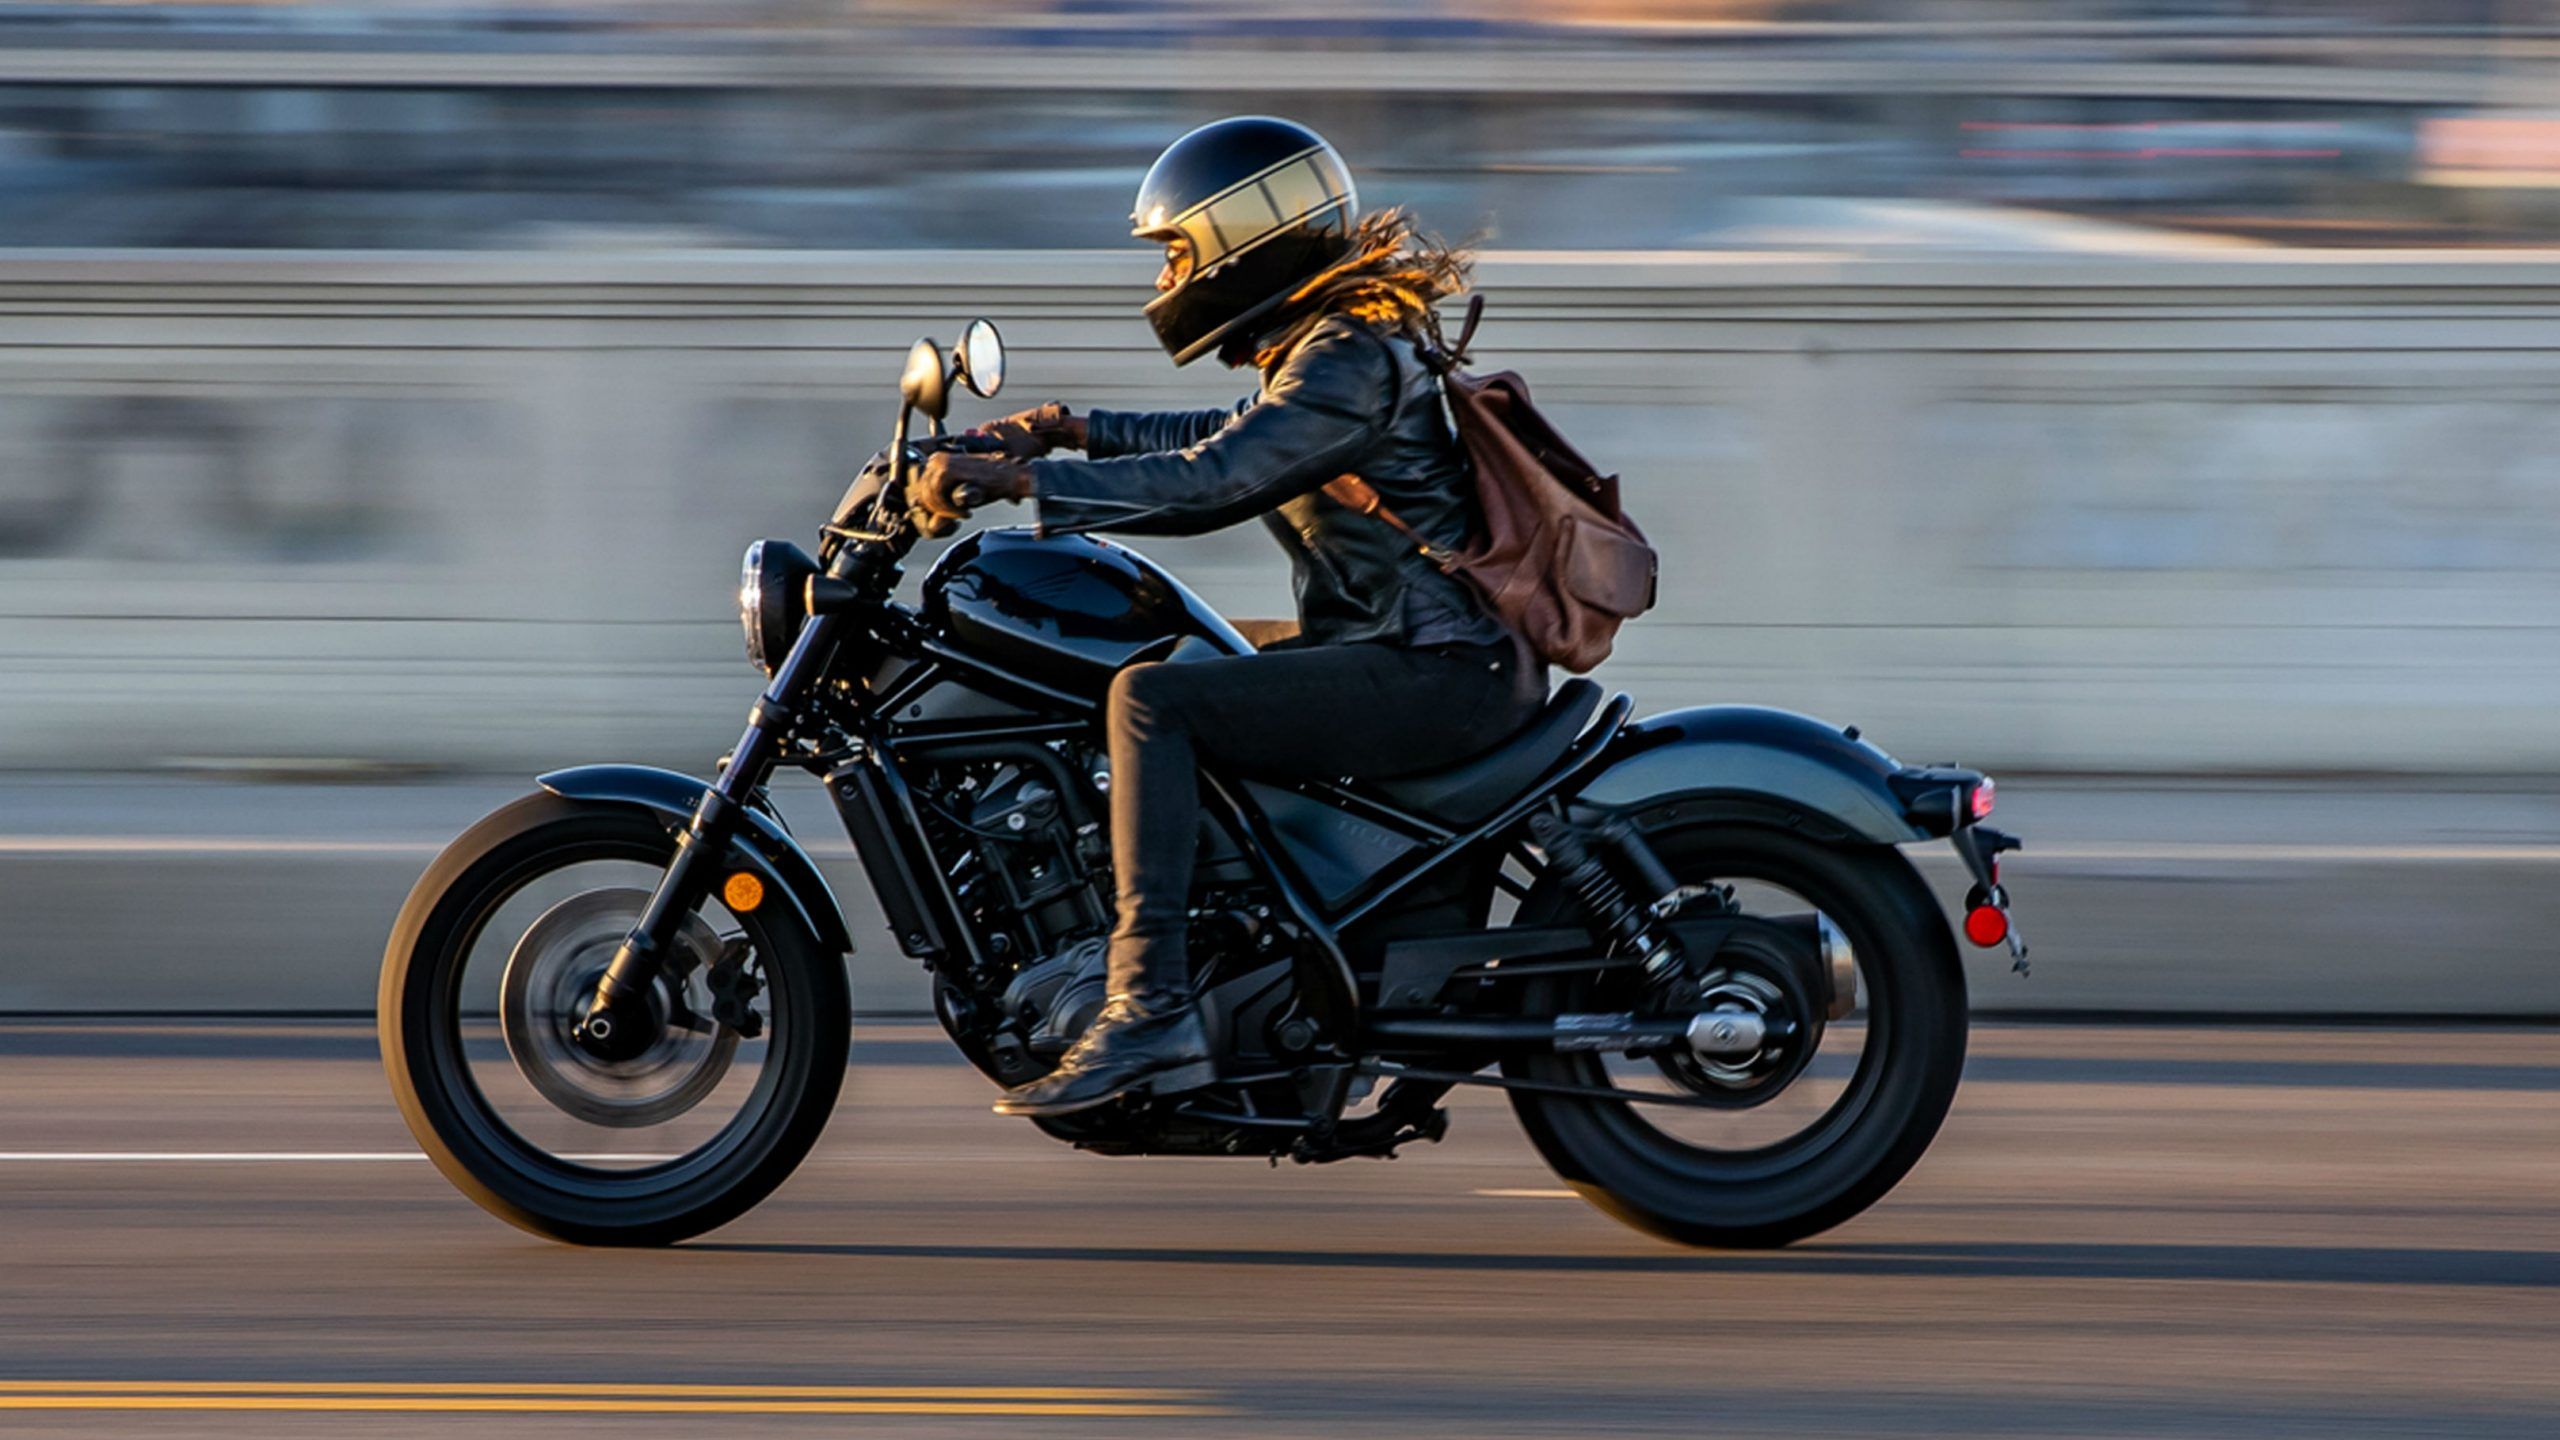 Ranking The Best New Cruiser Motorcycles You Can Buy For $20,000